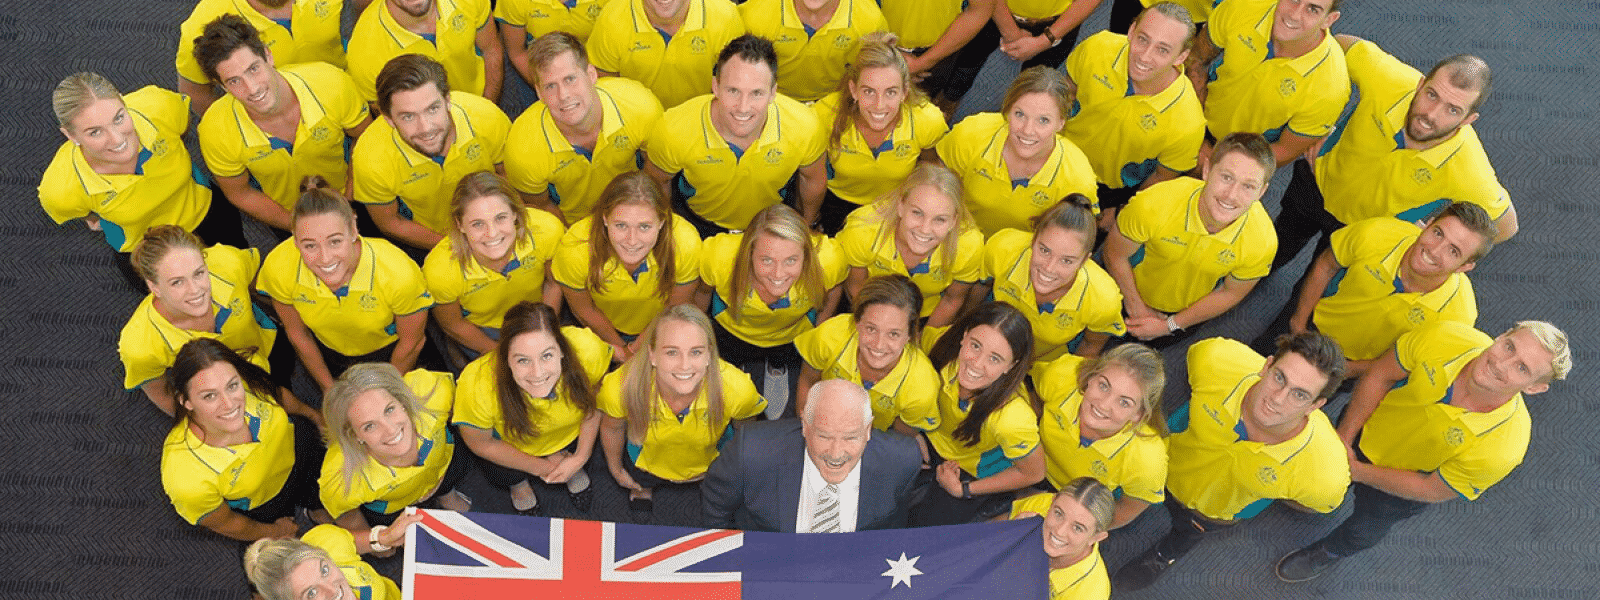 D'Orsogna support the Australian Commonwealth games members 2018